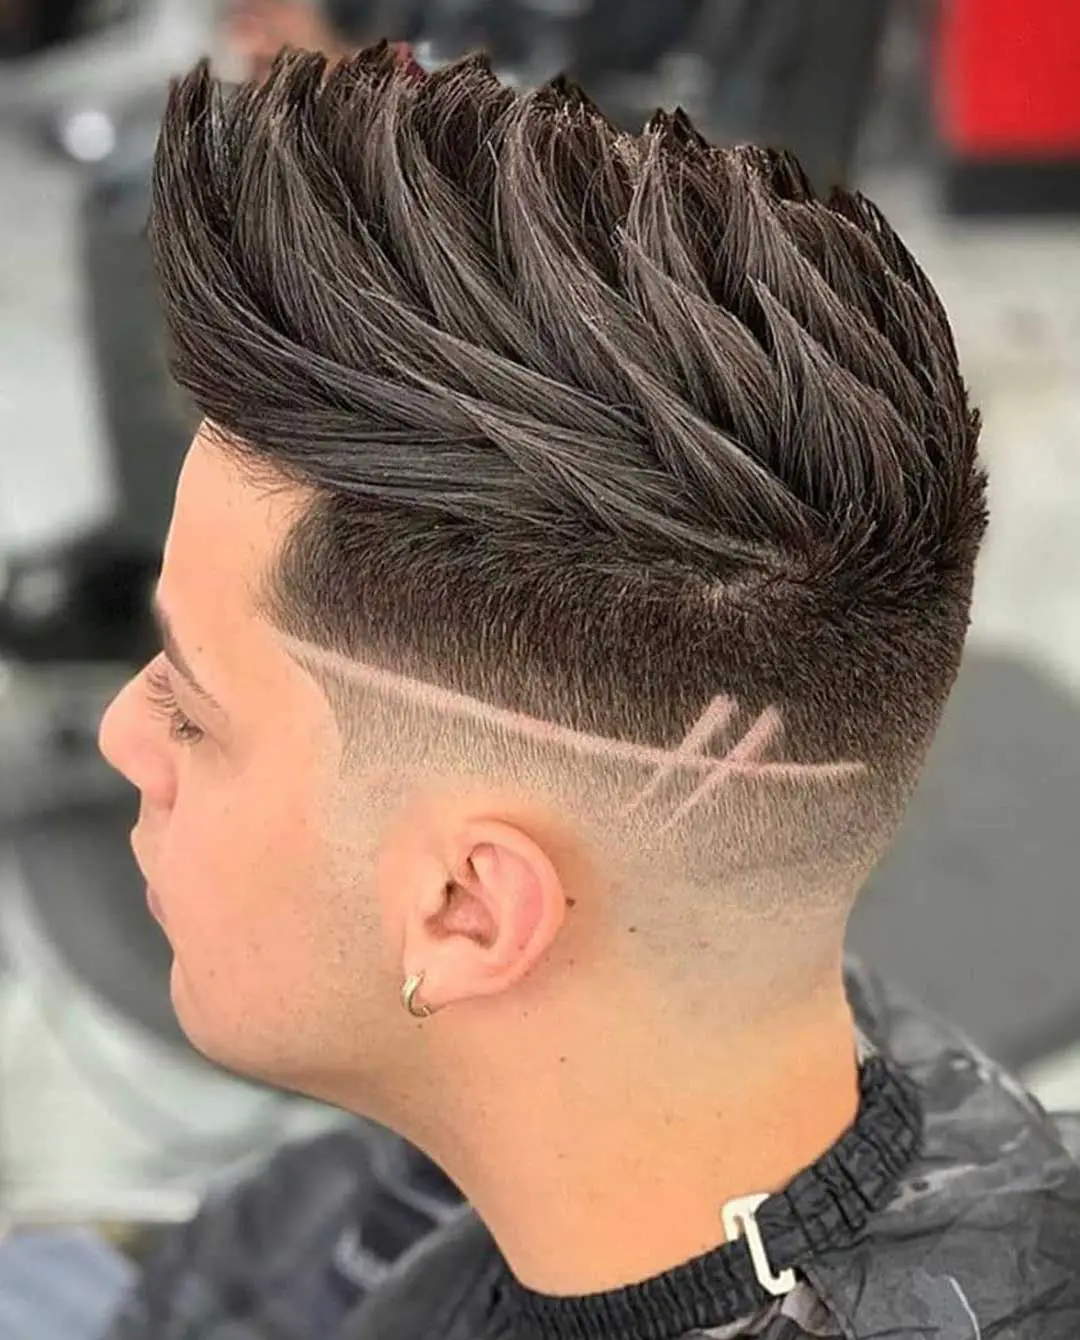 Line Up Haircut - 23 Awesome Styles for Men in 2023